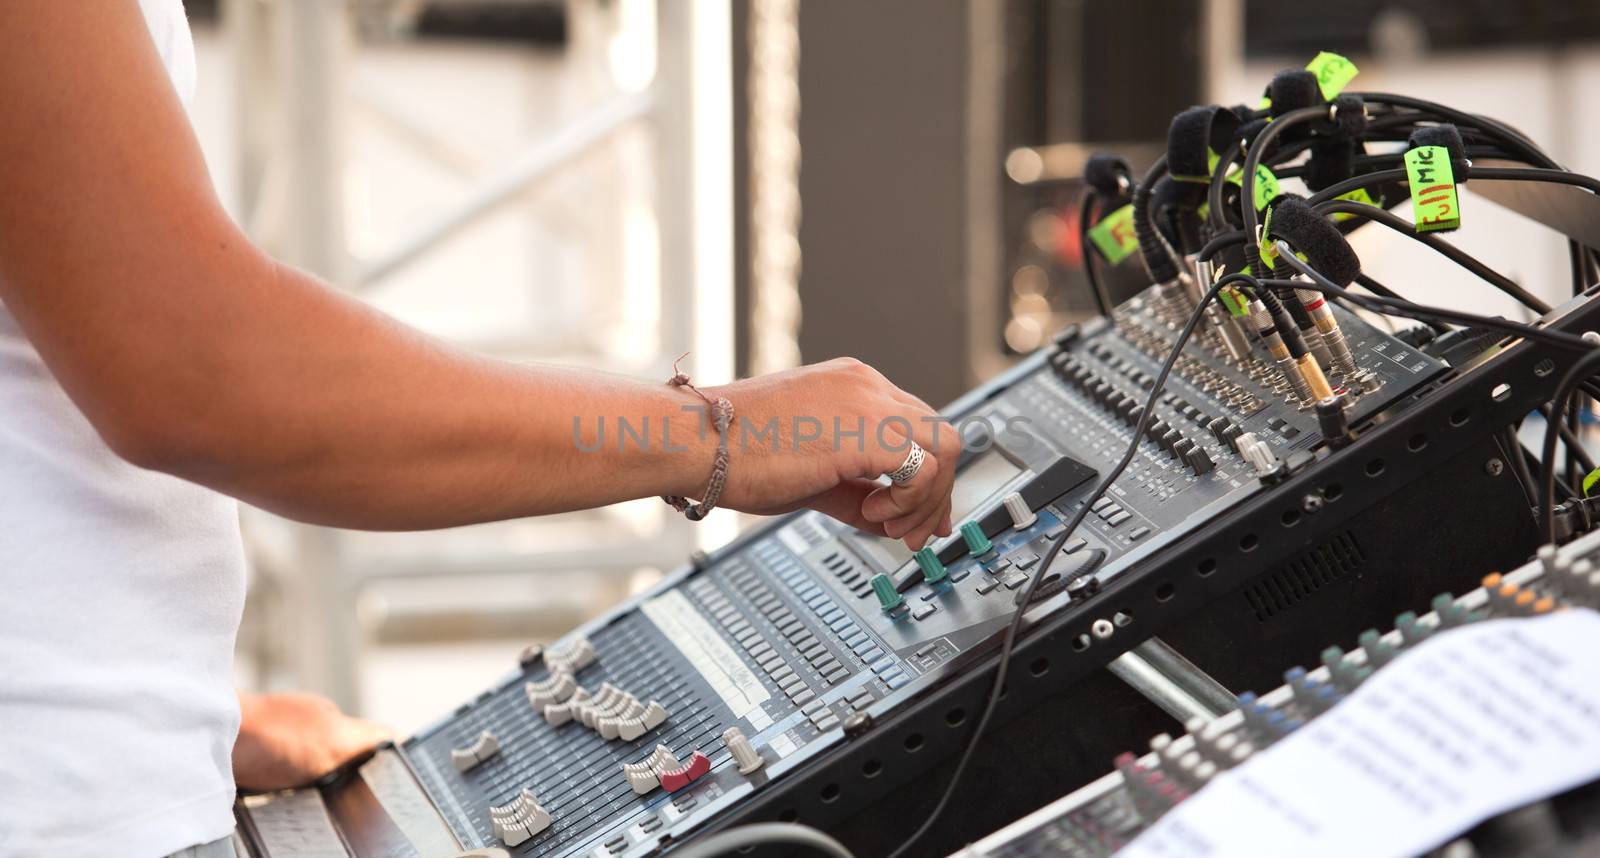 Hand over music mixer by wellphoto